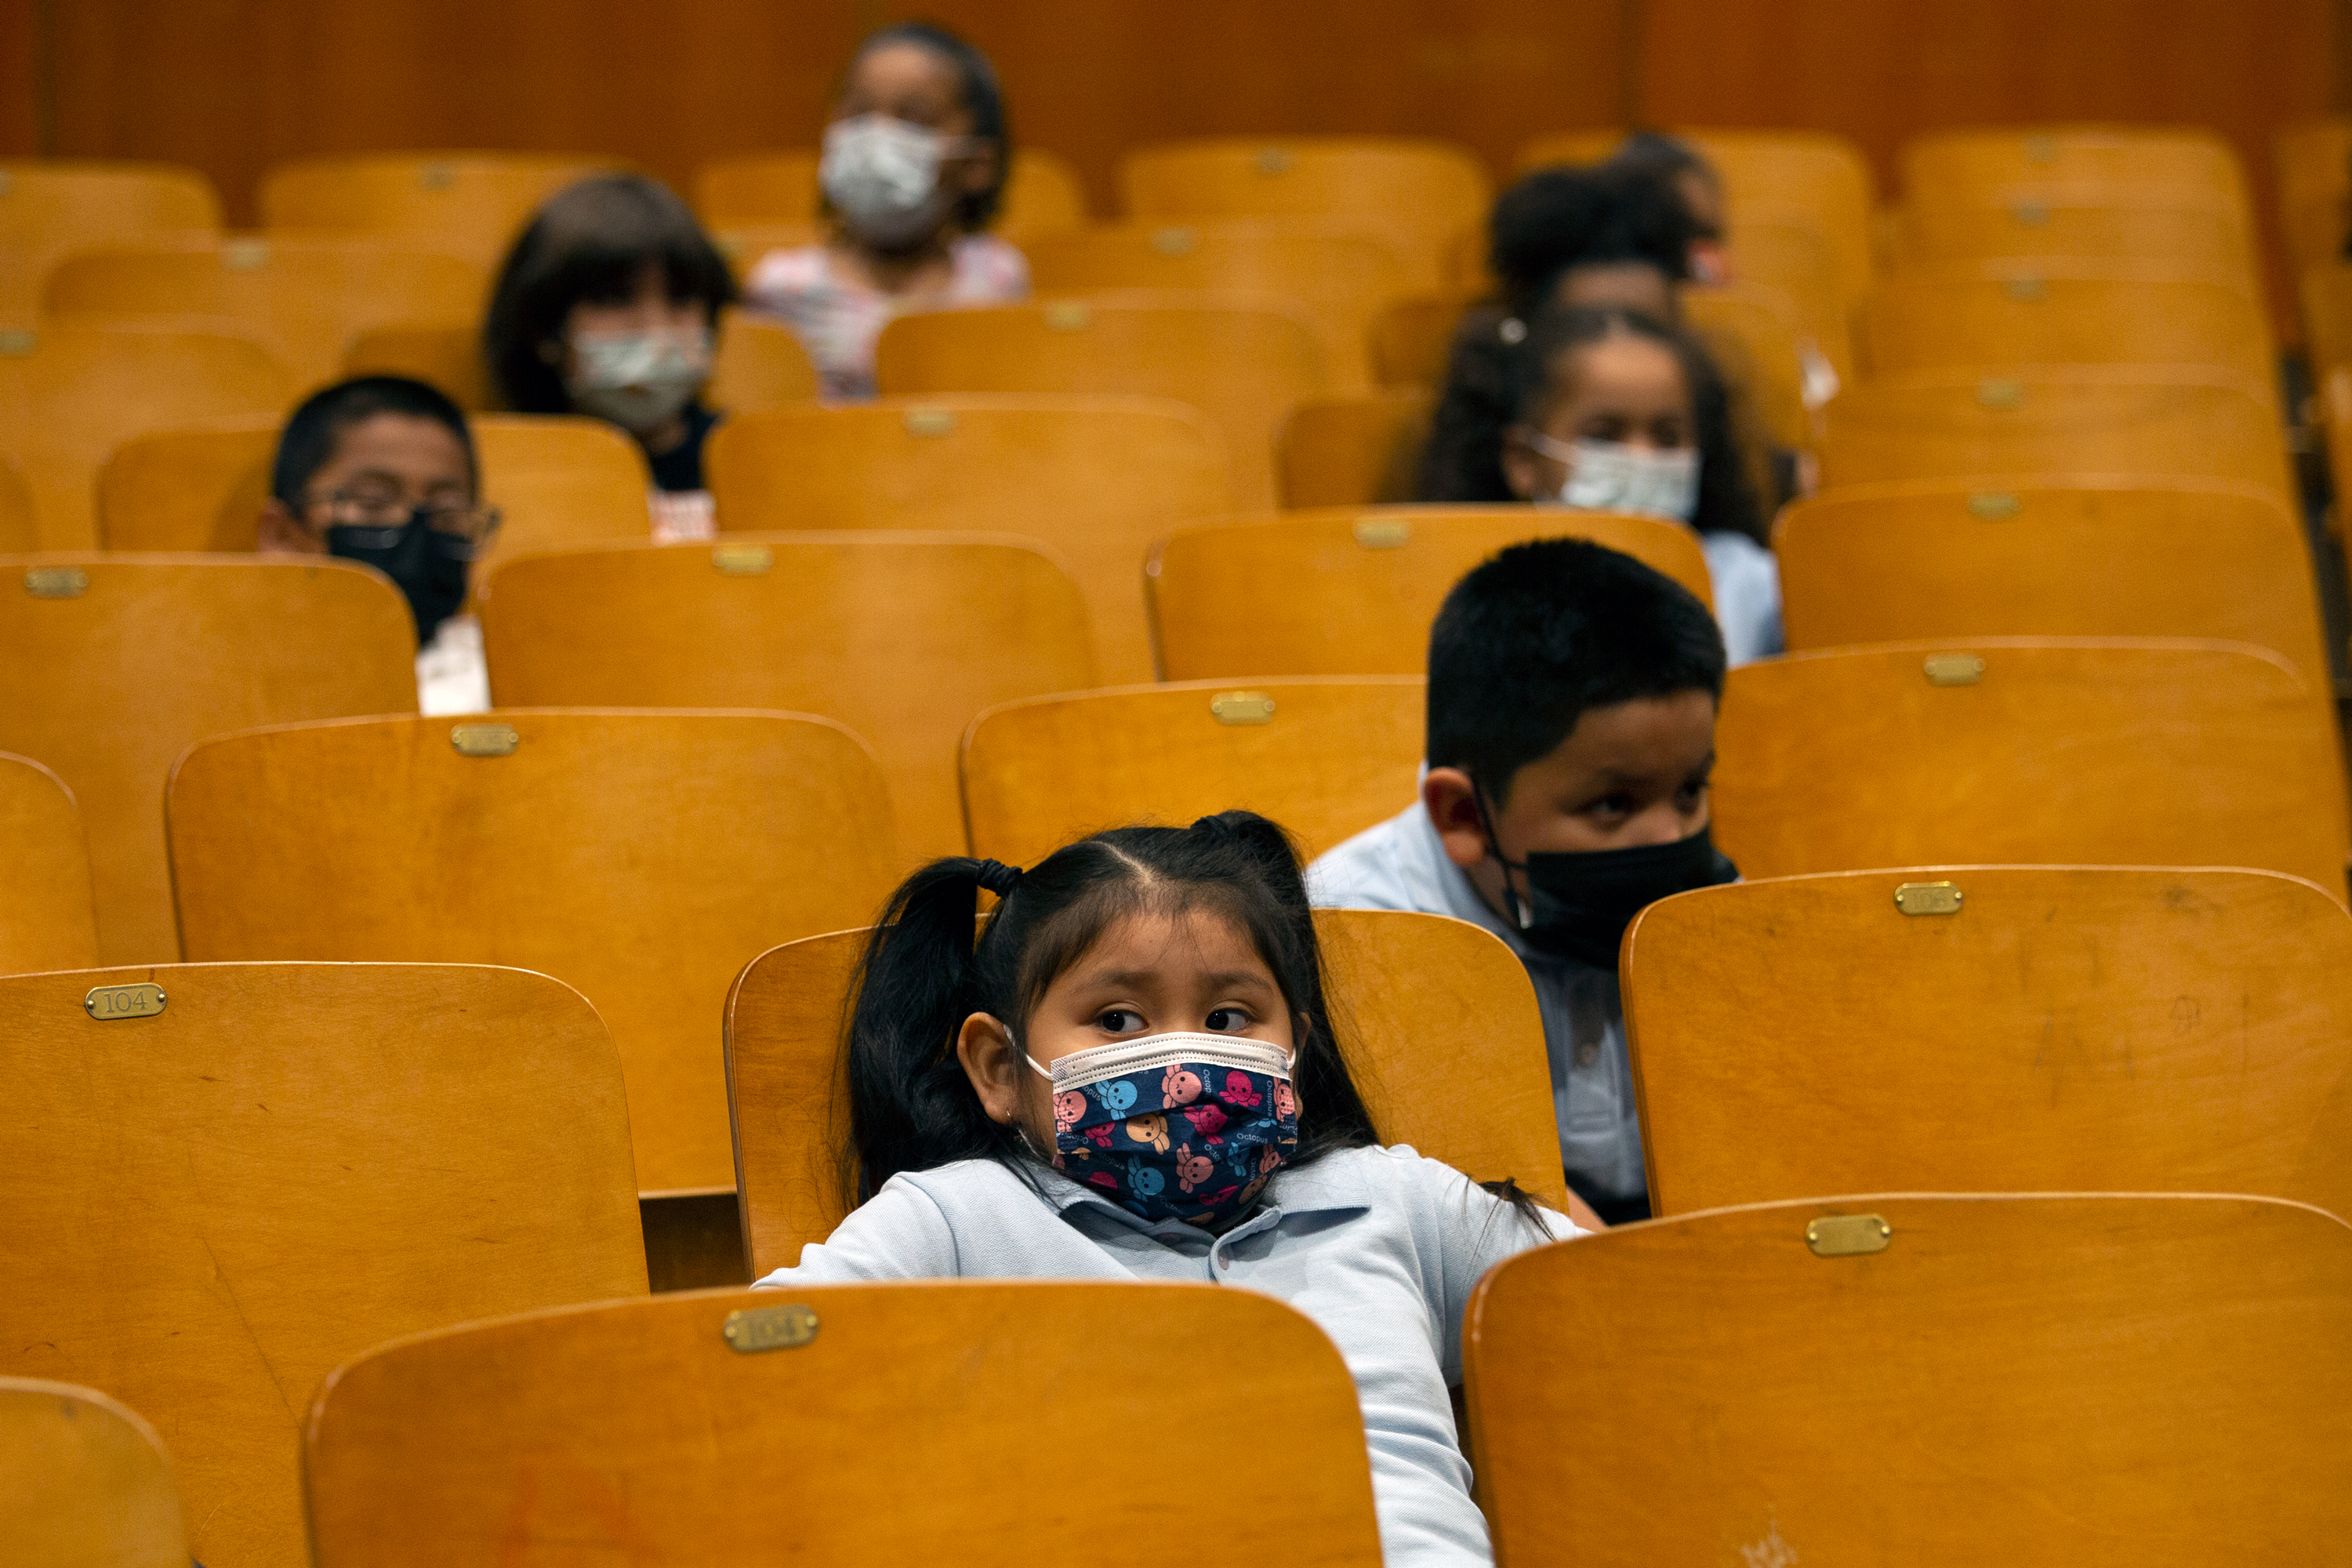 Students at P.S. 179 in the South Bronx wear masks during a holiday event, Dec. 17, 2021.